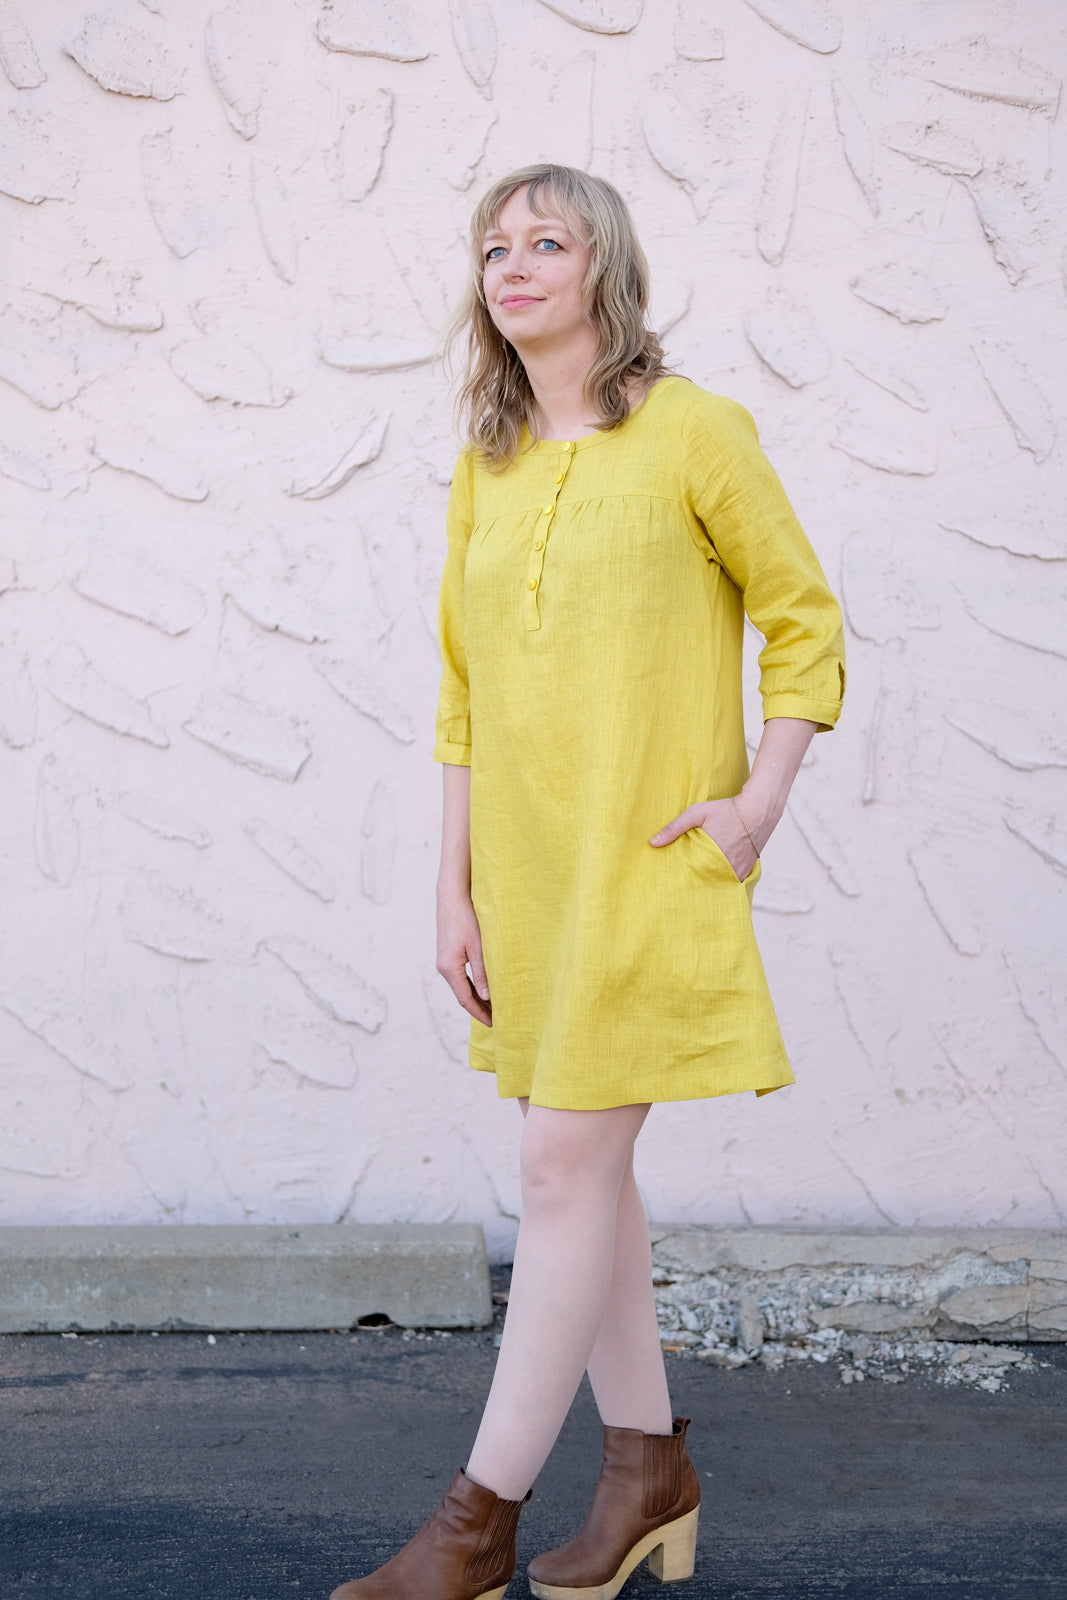 Amber in her citrus colored linen Brome with her hand in the pocket